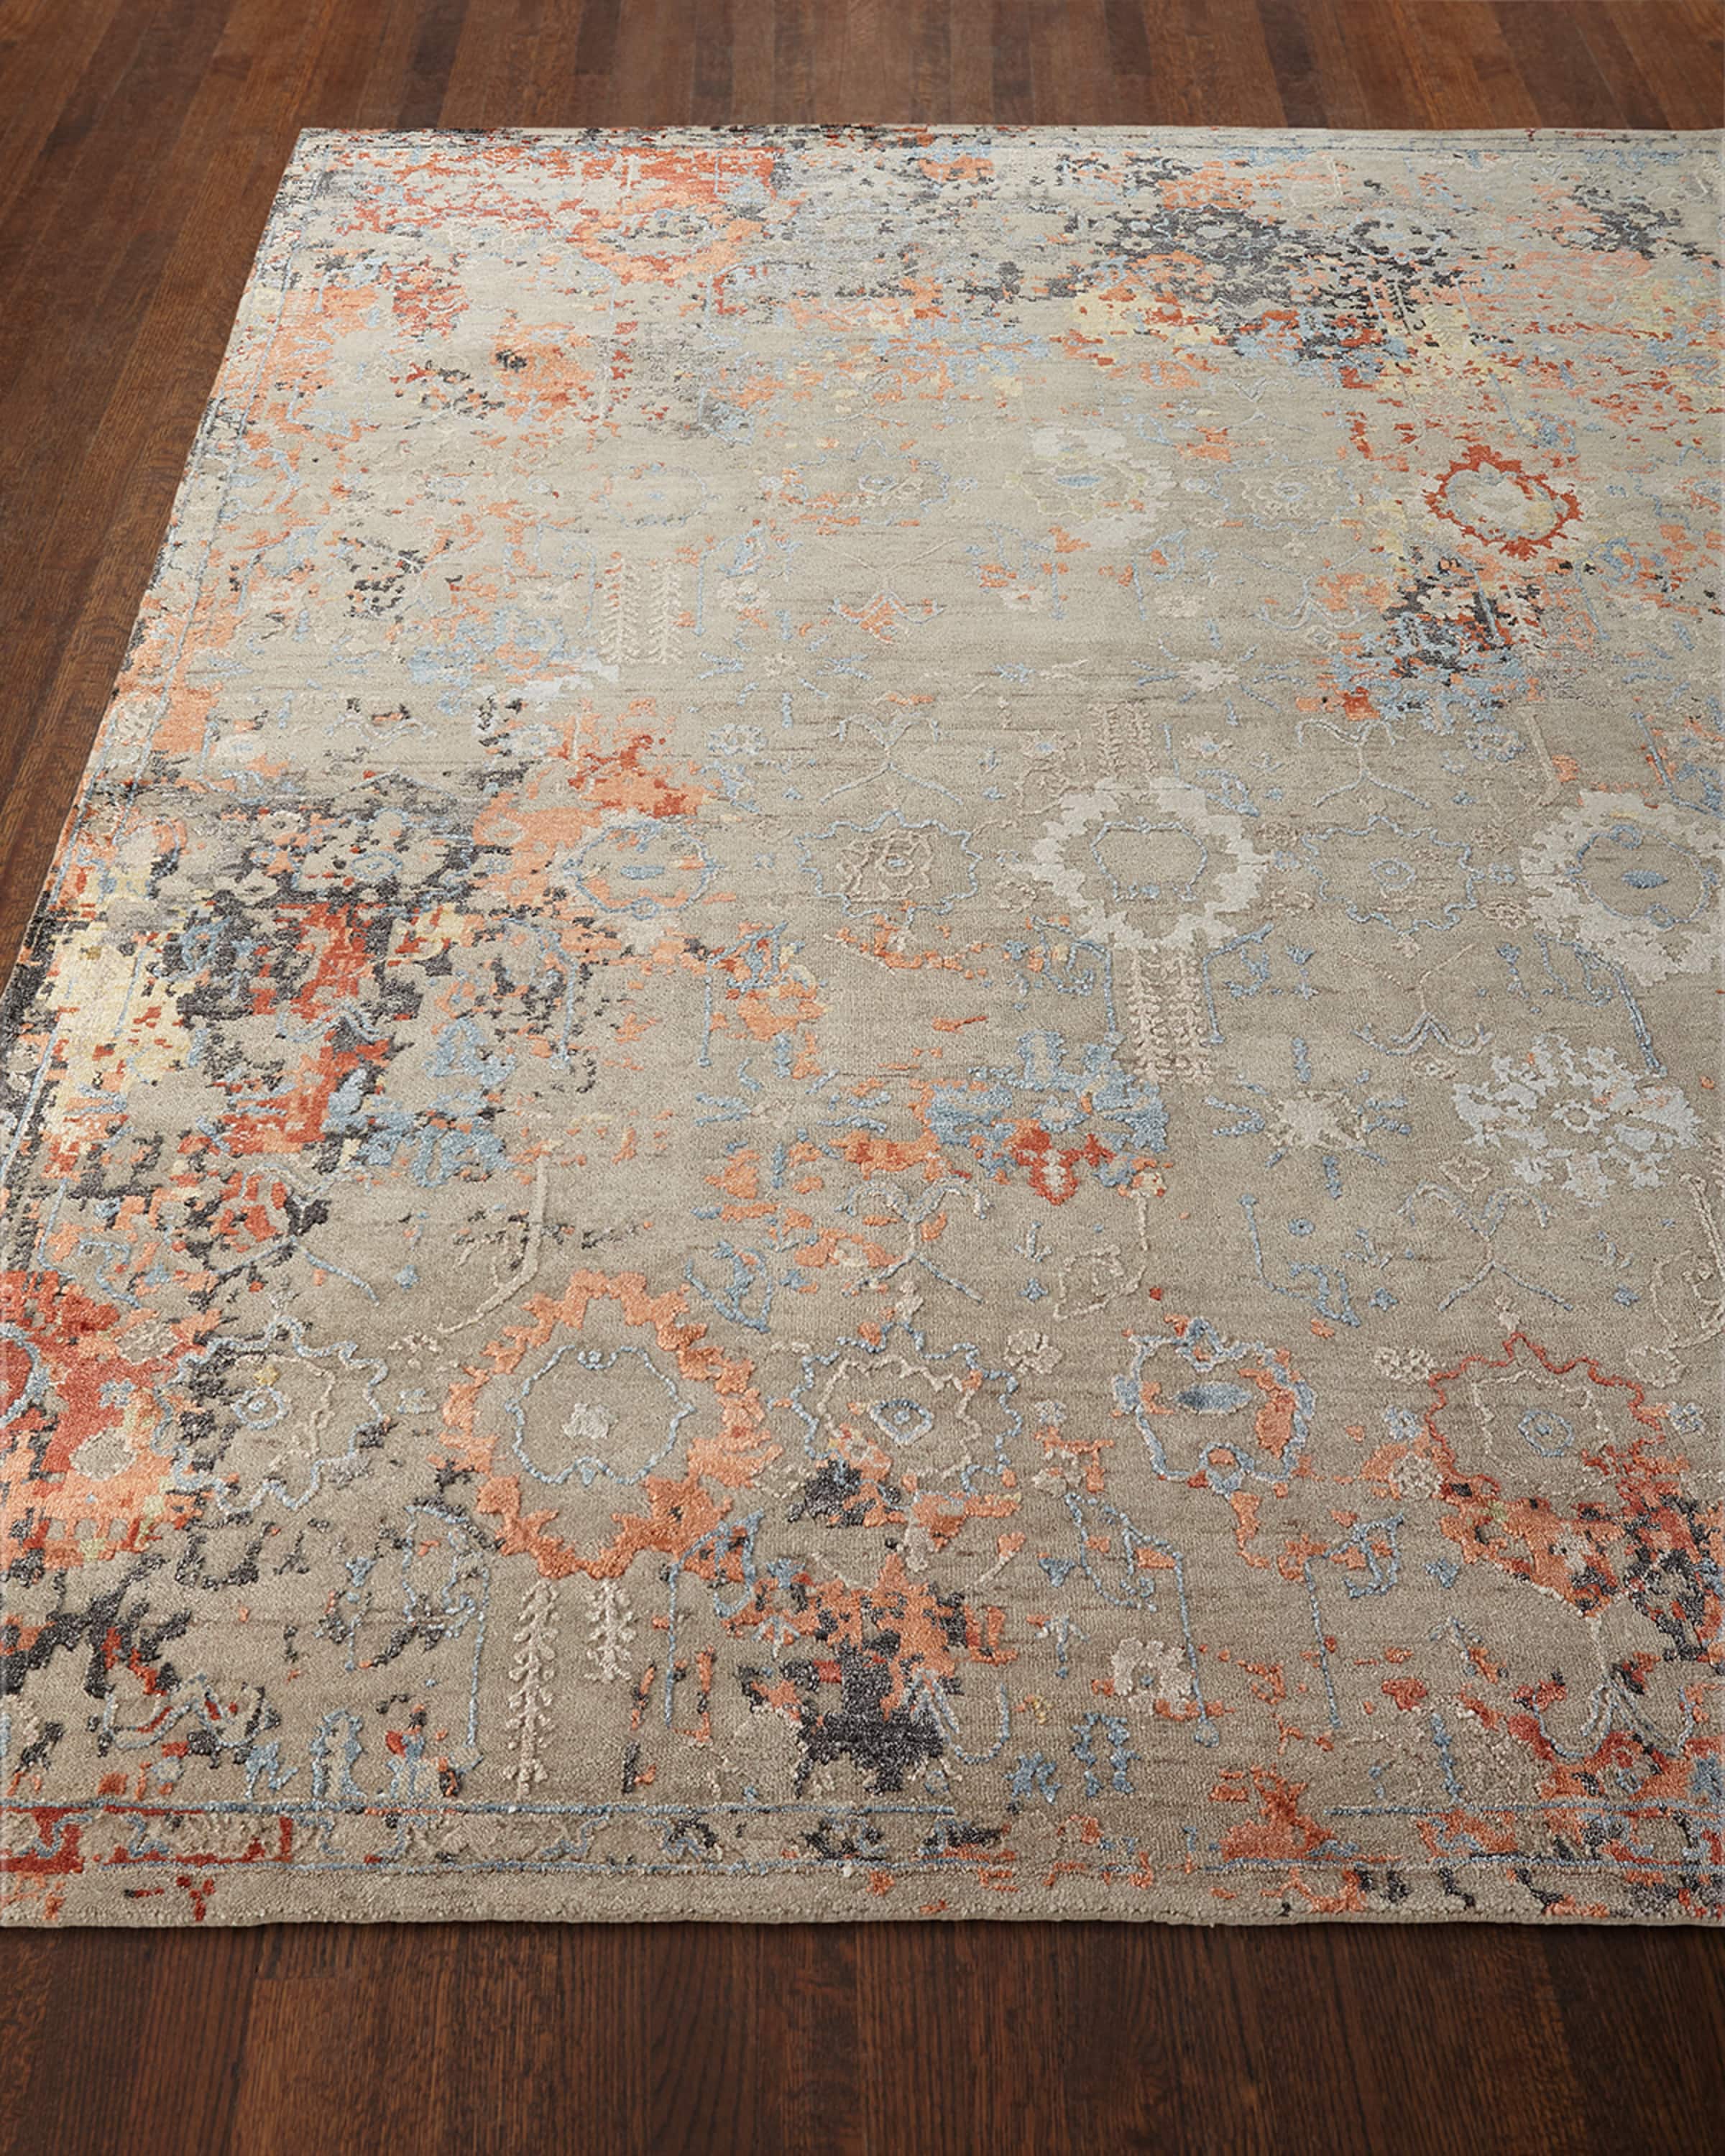 Jenzyn Hand-Knotted Rug, 4' x 6'